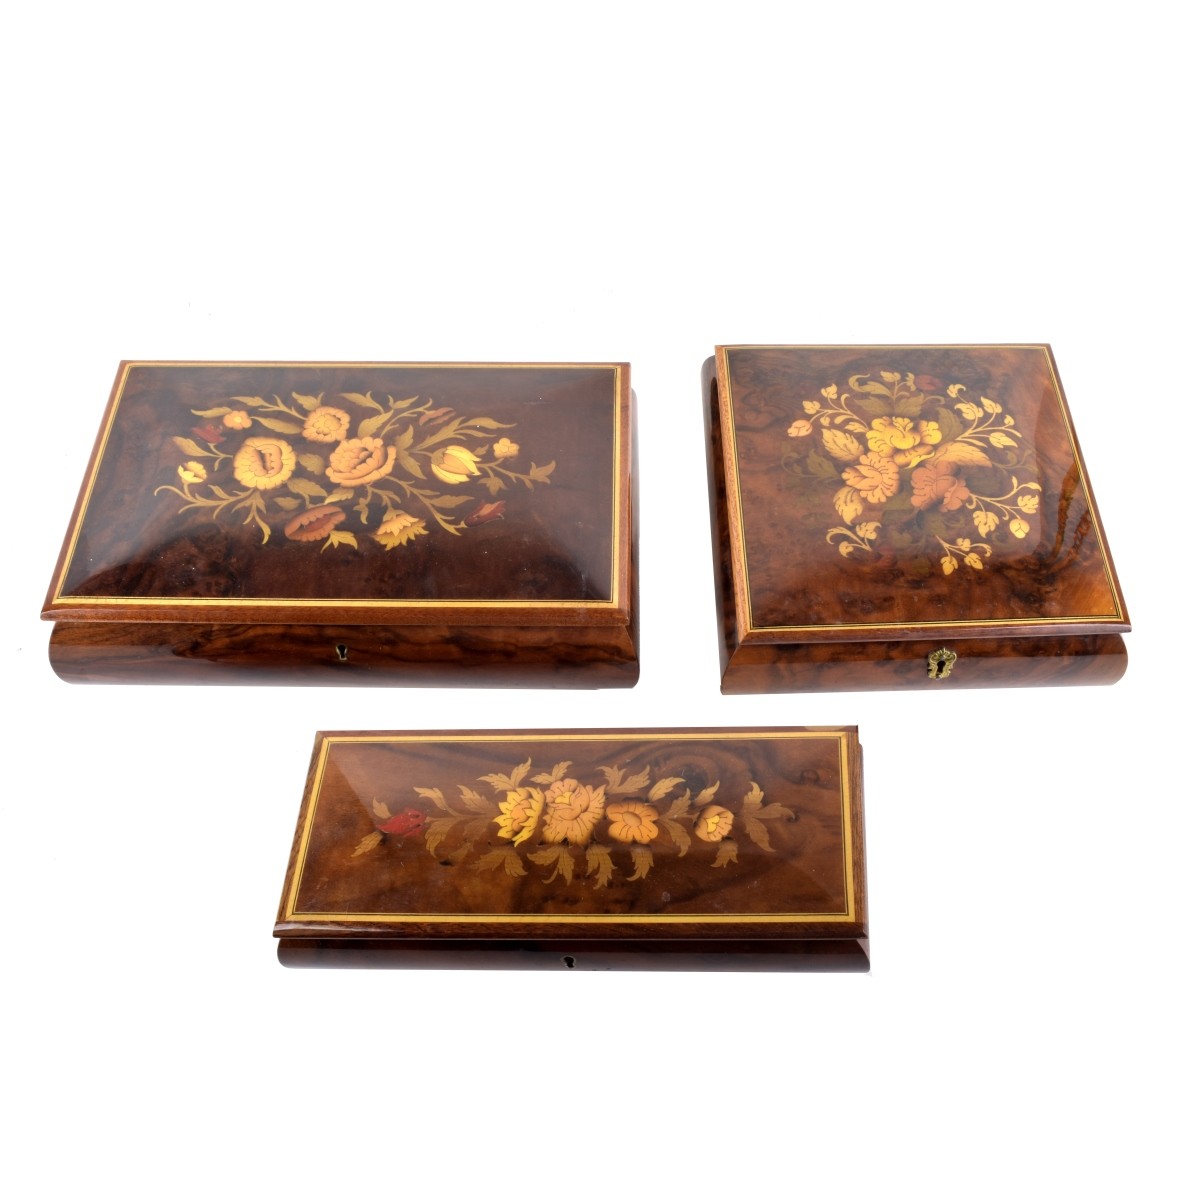 3 Italian Lacquer & Marquetry Music Boxes